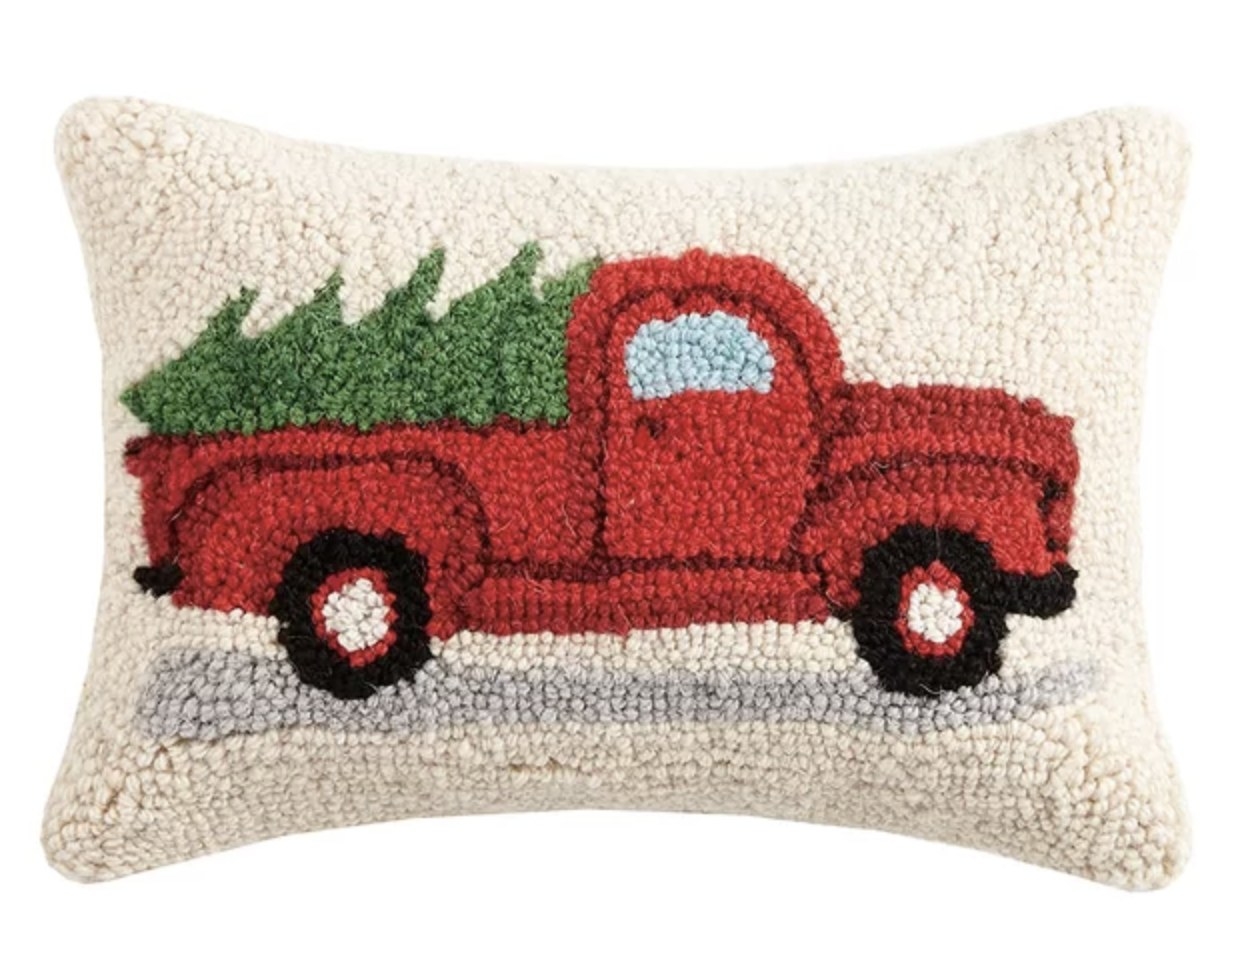 The white pillow has a red truck lugging a green tree in the trunk